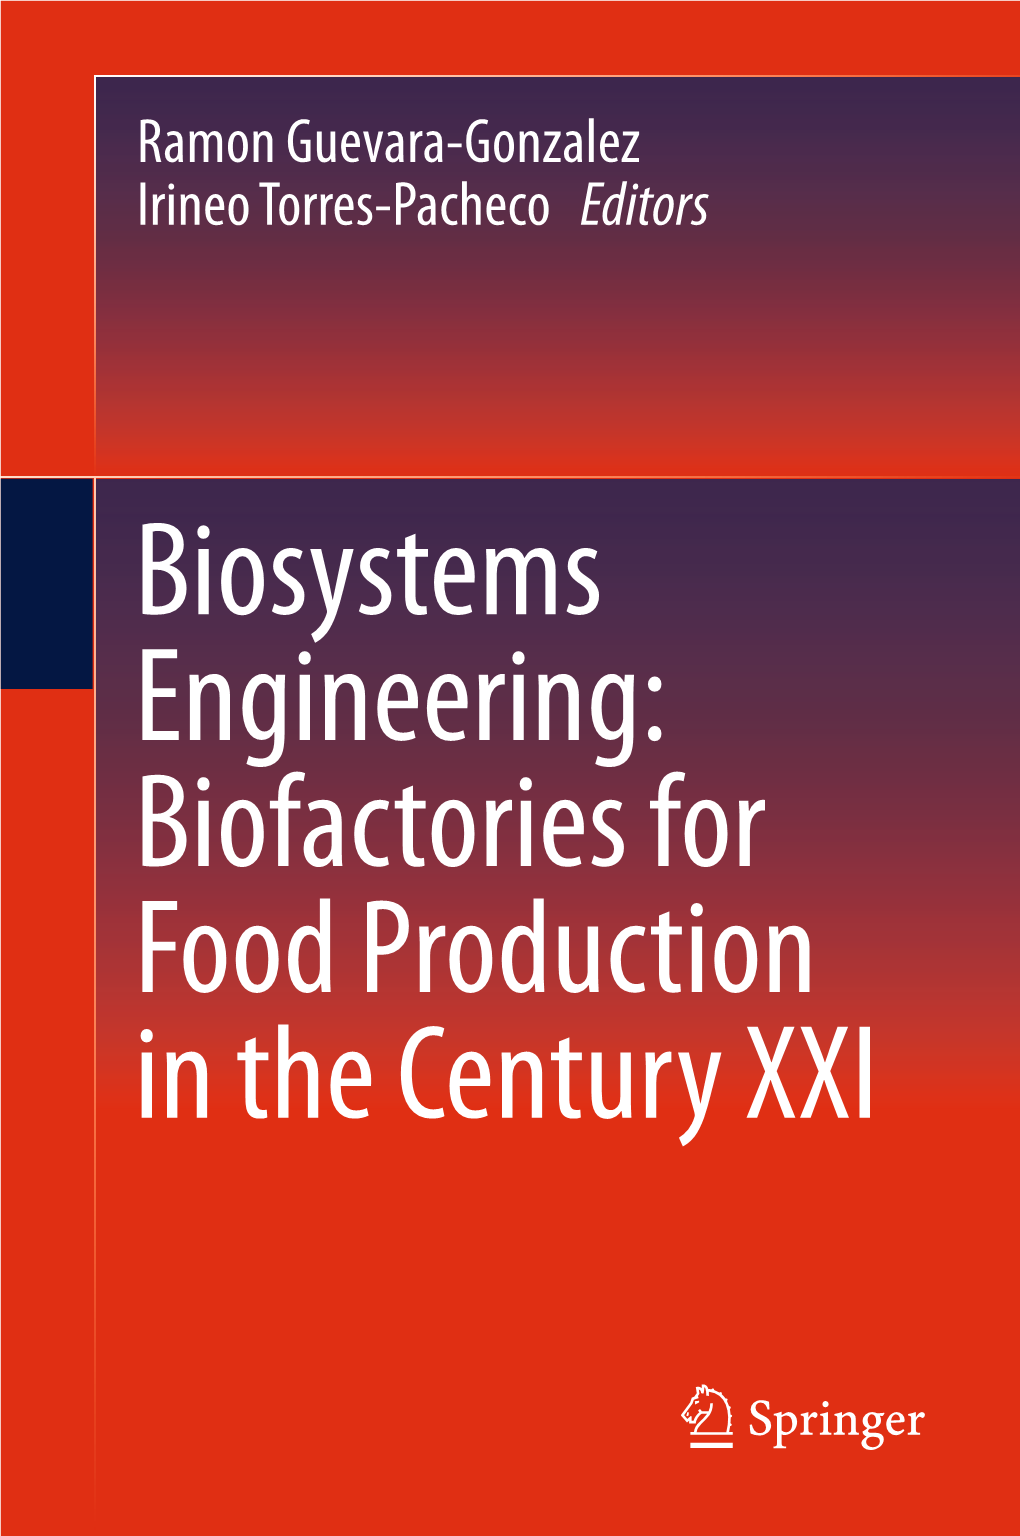 Biosystems Engineering: Biofactories for Food Production in the Century